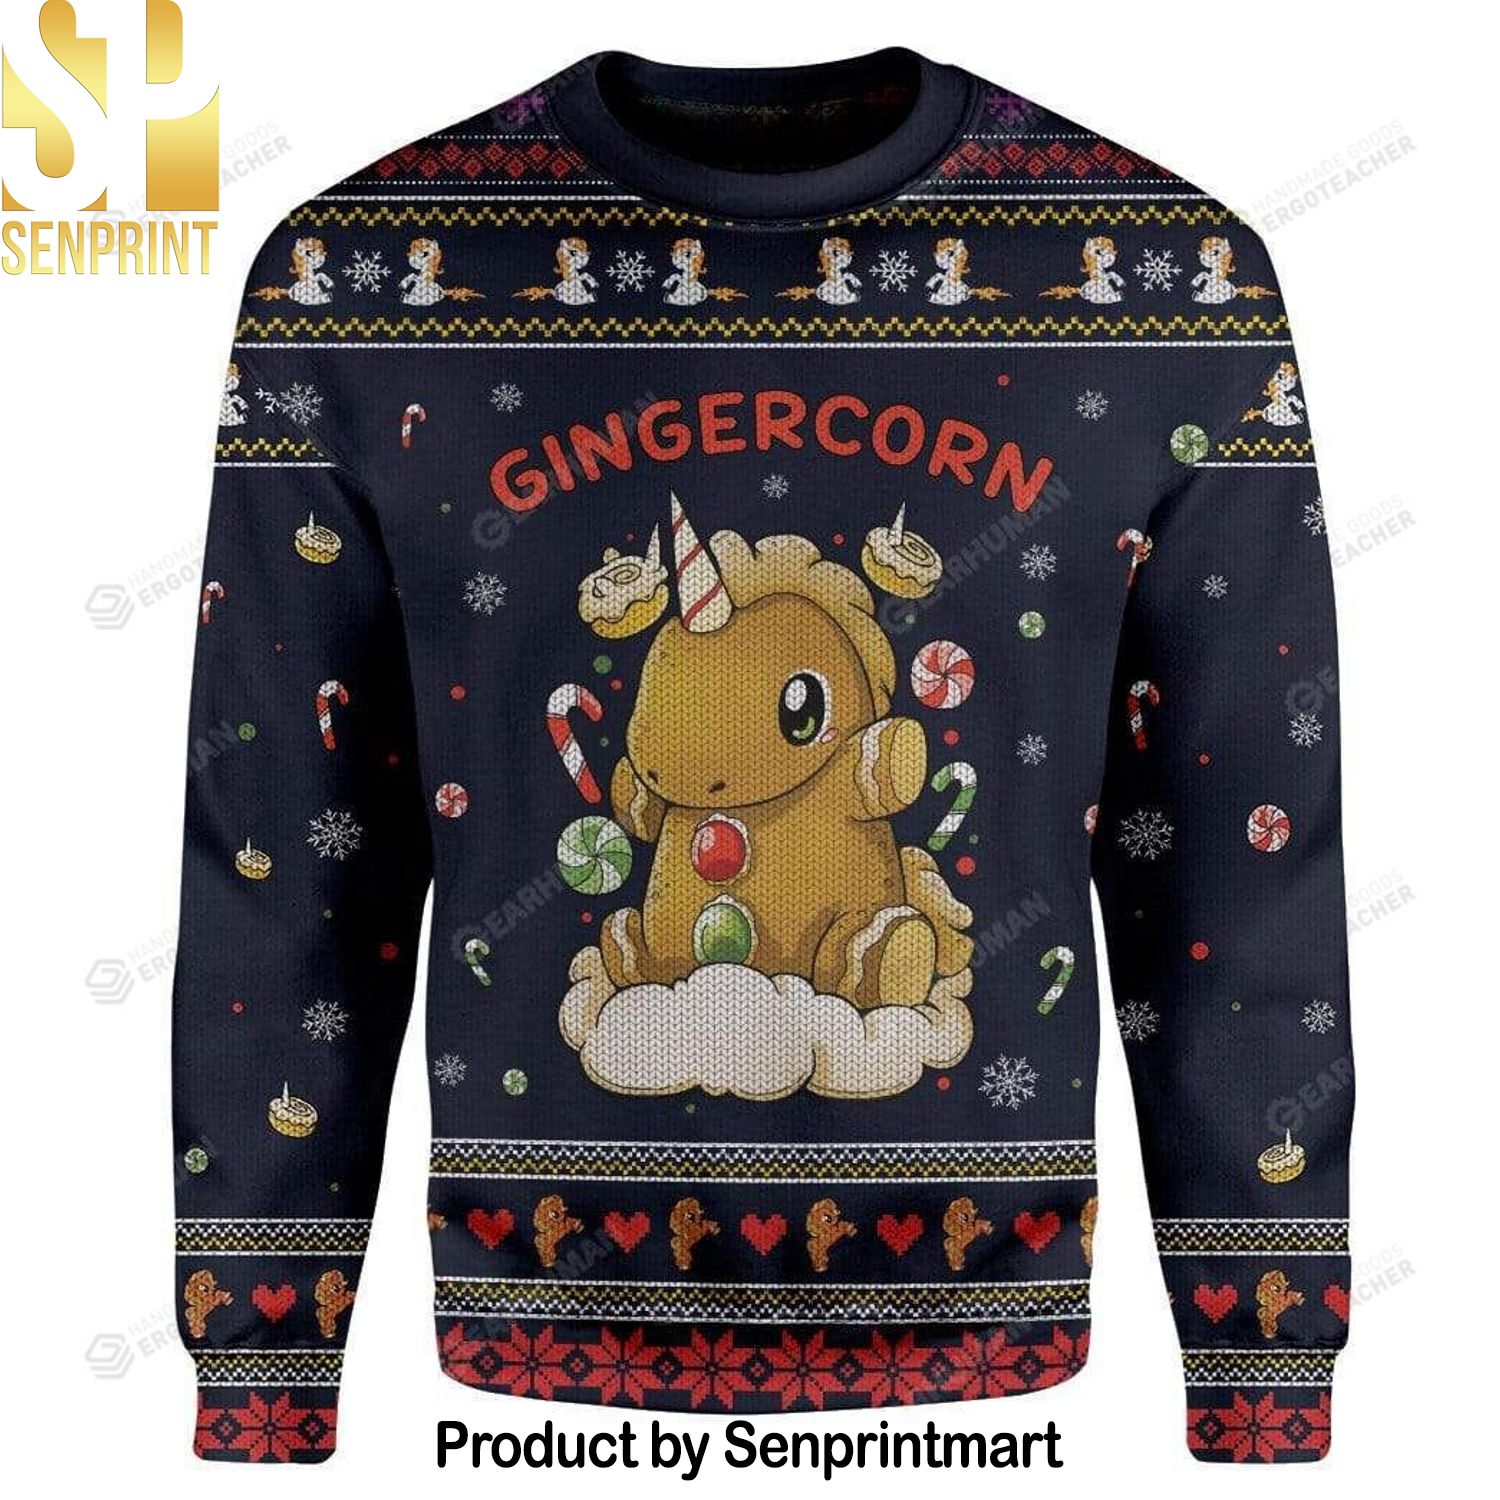 Gingercorn Knitting Pattern Ugly Christmas Holiday Sweater